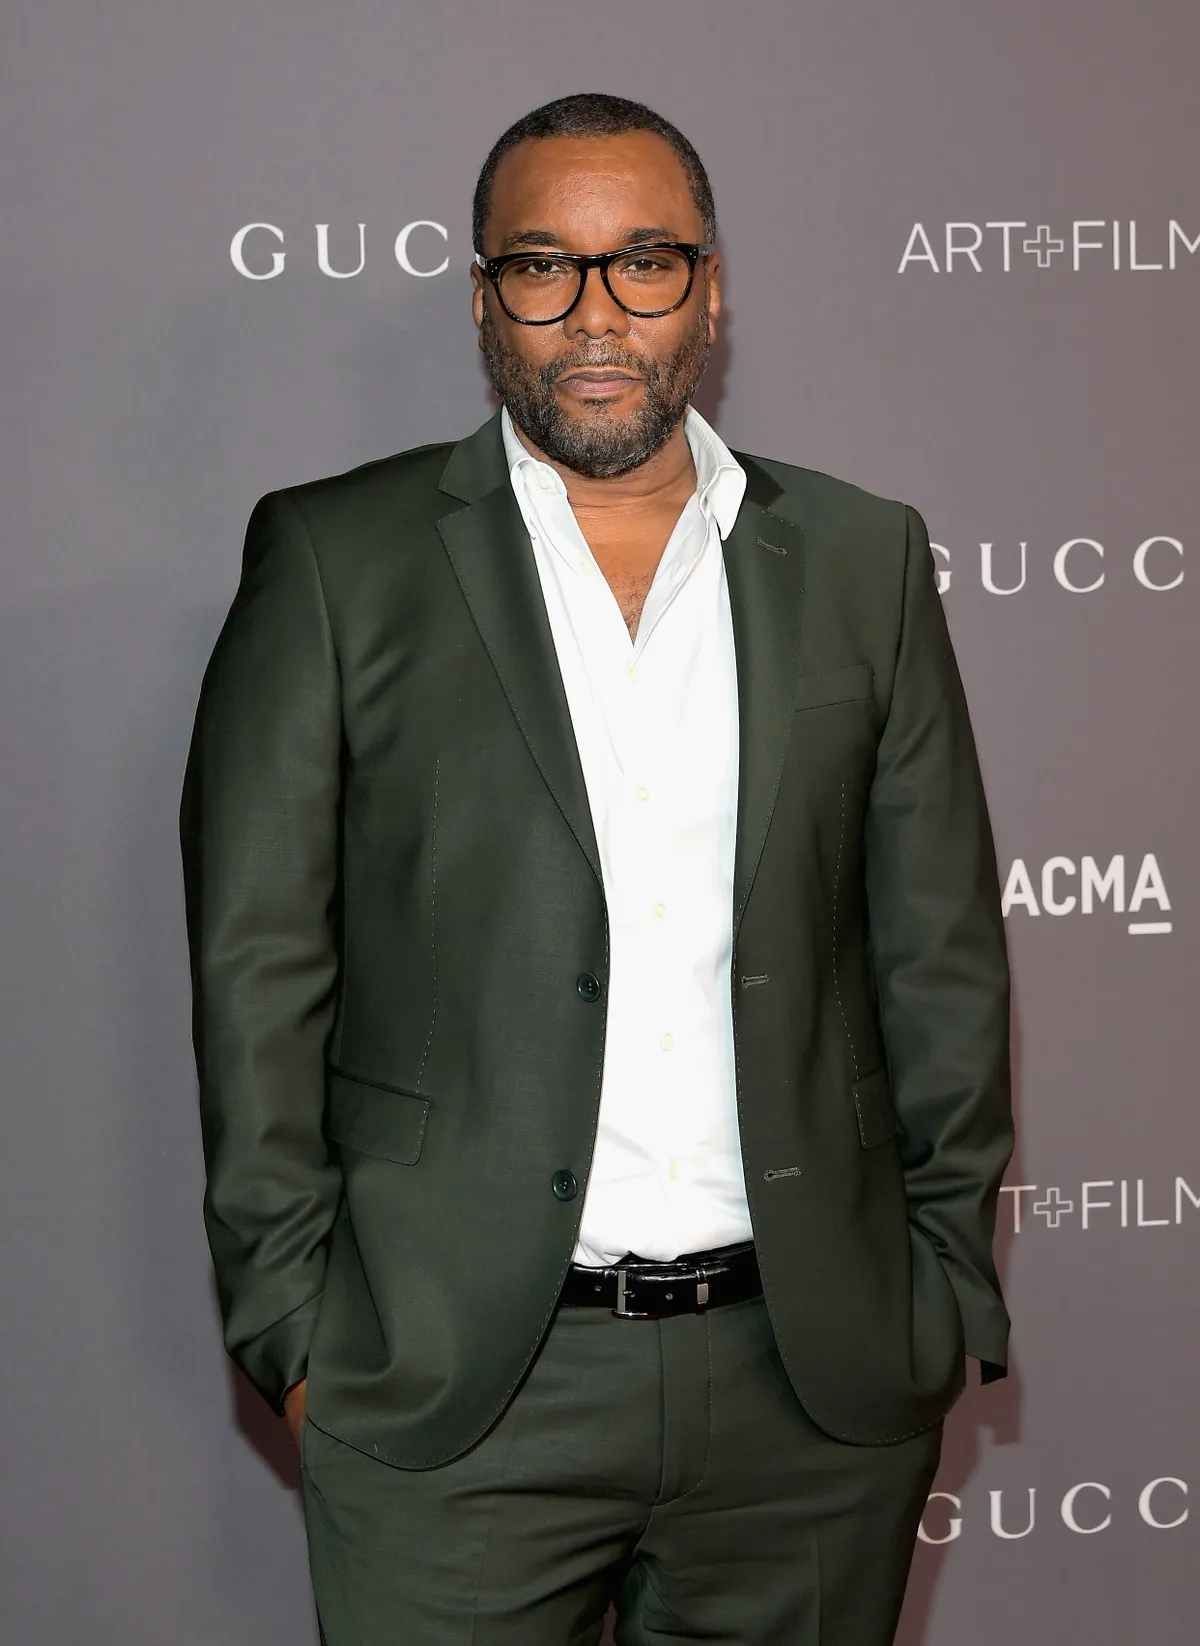 Lee Daniels at the LACMA Art + Film Gala on November 4, 2017 in Los Angeles, California. | Photo: Getty Images